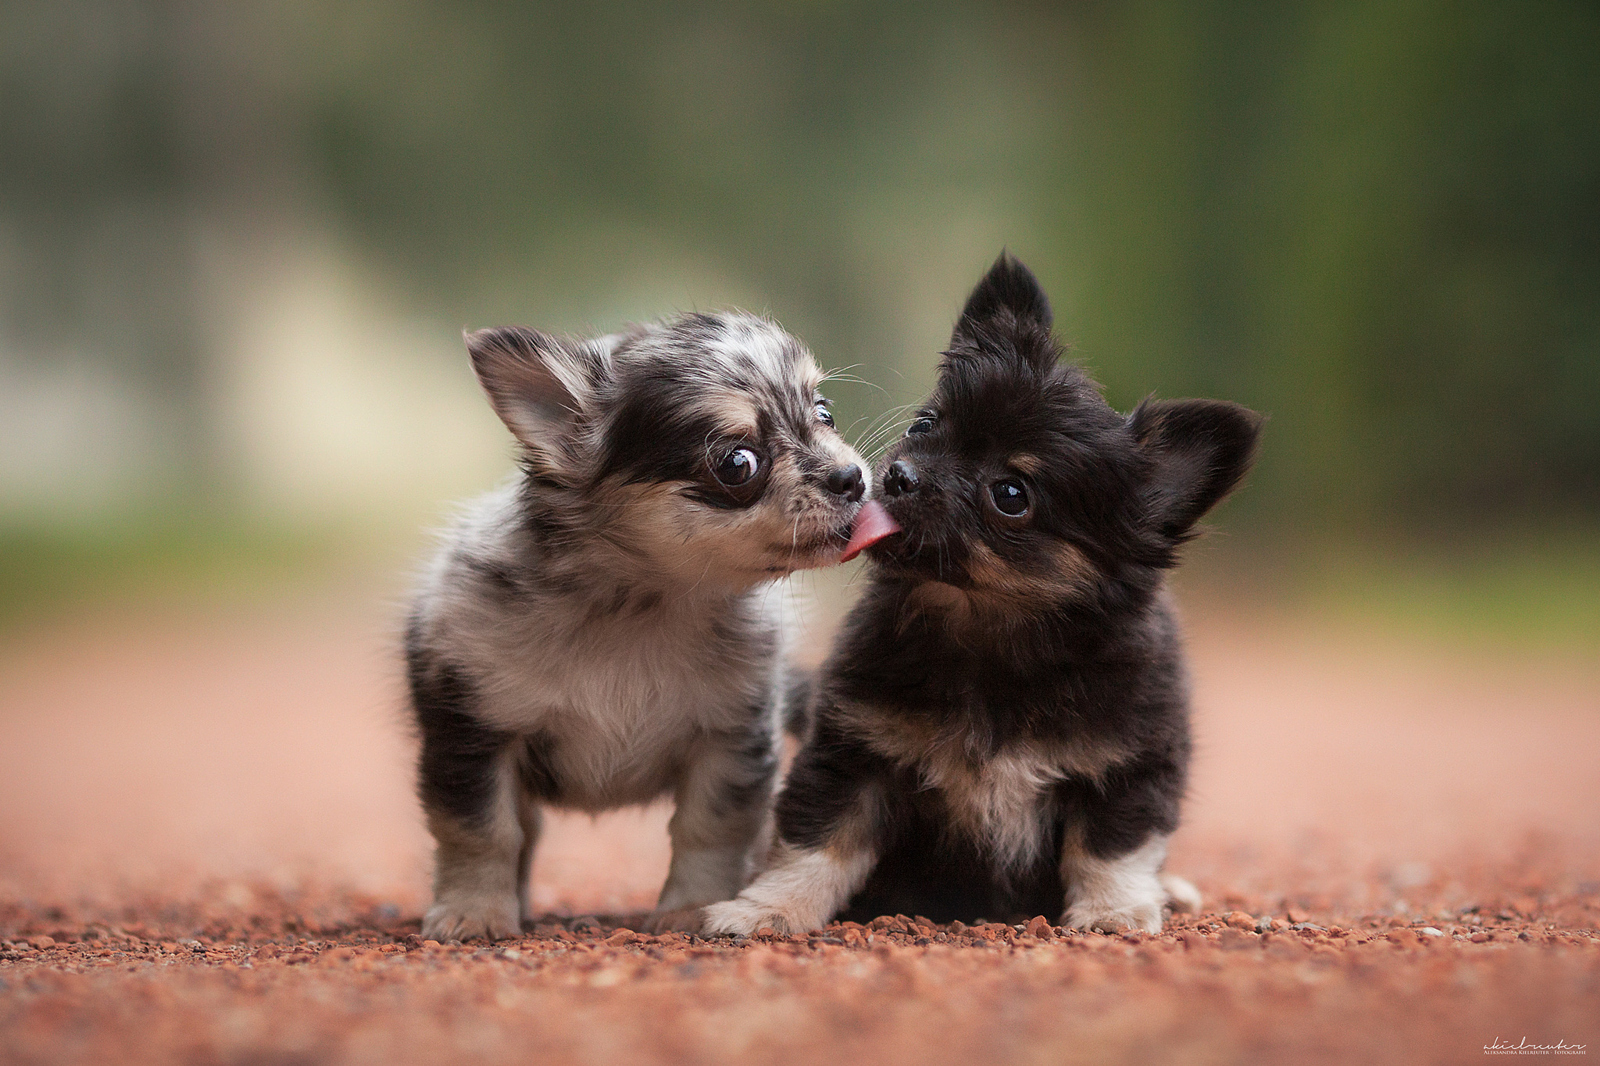 21+ Adorable Puppy Photos & Images on 500px